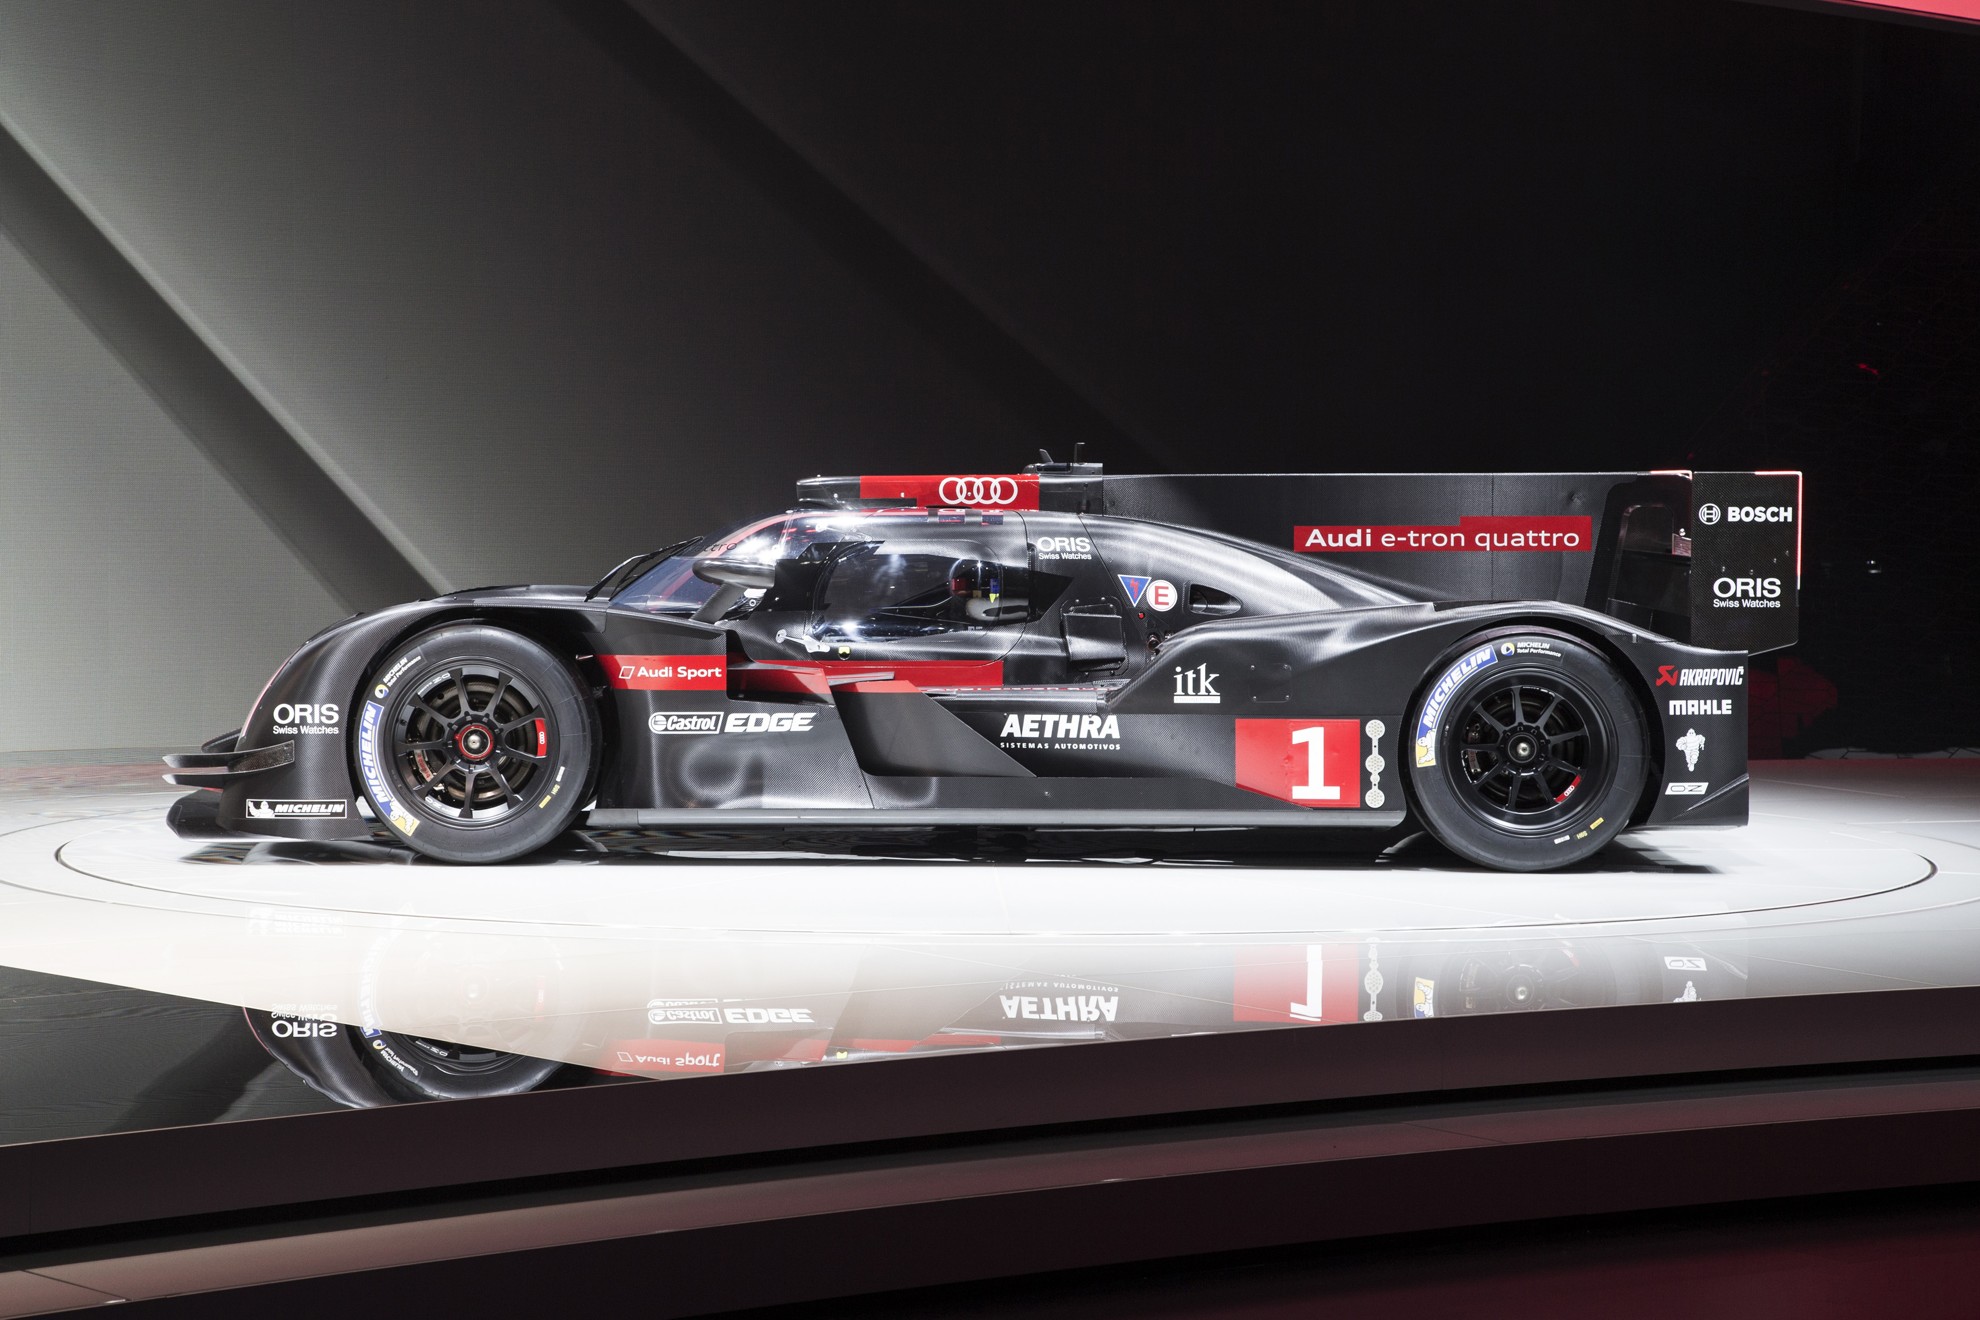 AUDI SPORT IN 2014 AGAIN RELIES ON STRONG PARTNERS IN THE FIA WEC